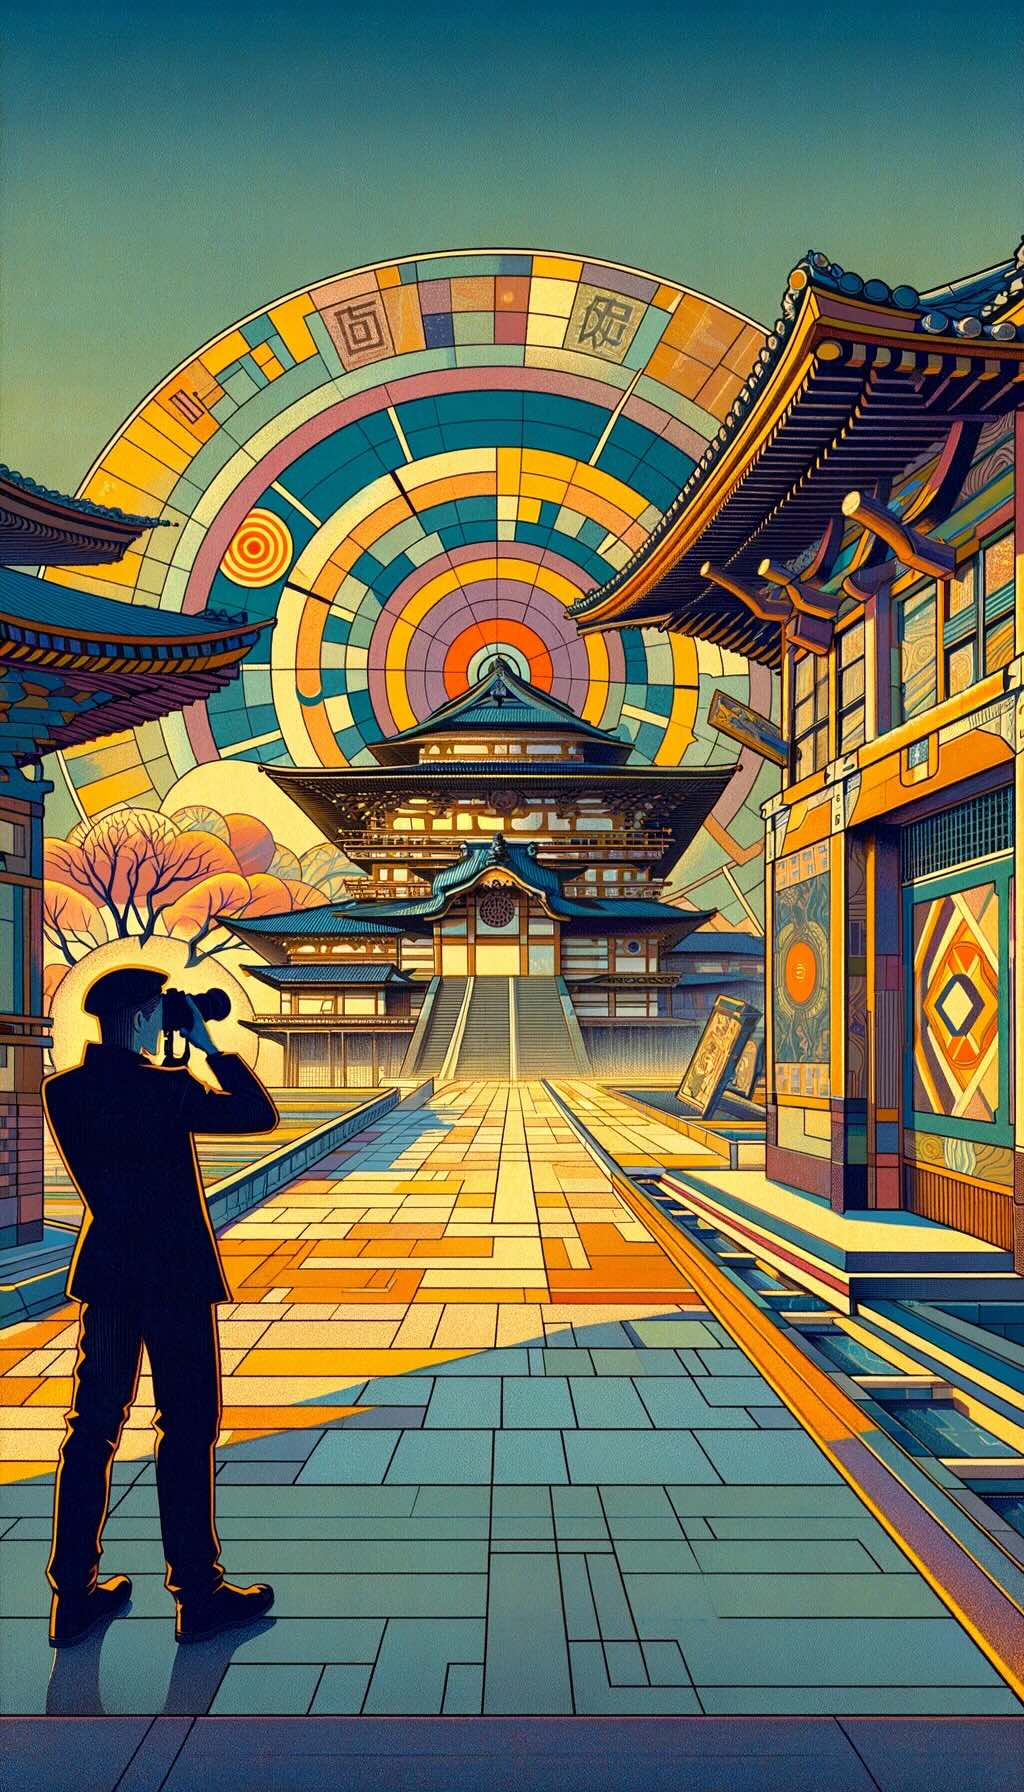 Visualizes the concept of photographing Japan's haunted sites with an ethical and culturally sensitive approach. It depicts a photographer capturing the haunting atmosphere, focusing on architectural and natural elements, highlighted with plays of light and shadows. Featuring bold colors and geometric shapes, dynamically represents the respectful practices involved in documenting these mysterious locations.